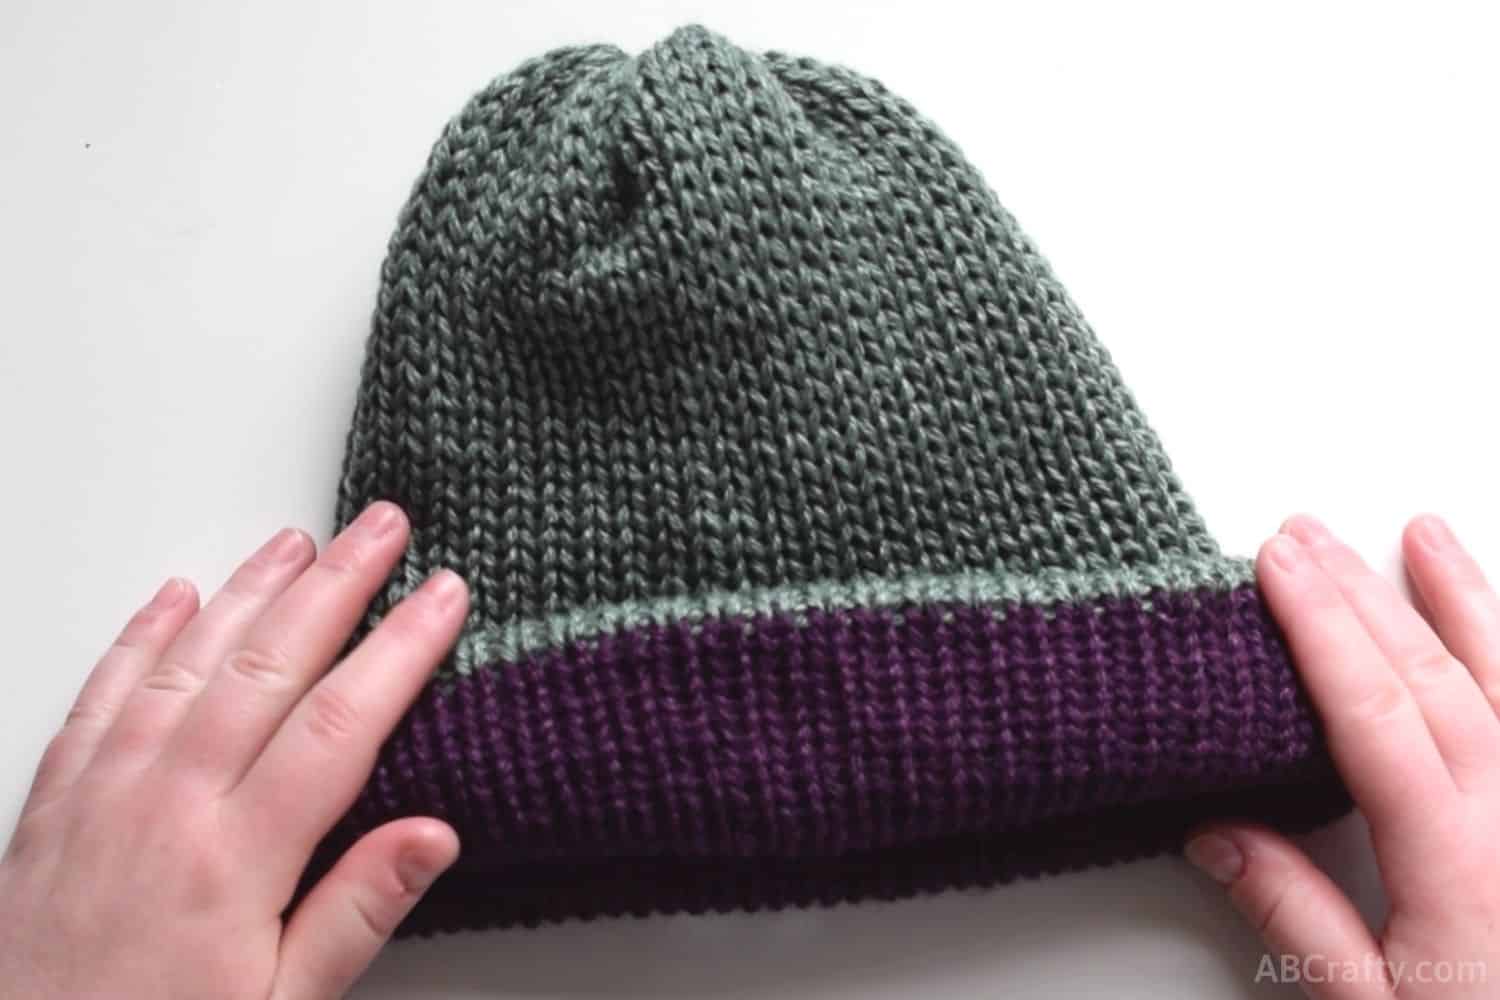 Loom Knit Hat - Easy Instructions to Loom Knit a Hat - AB Crafty